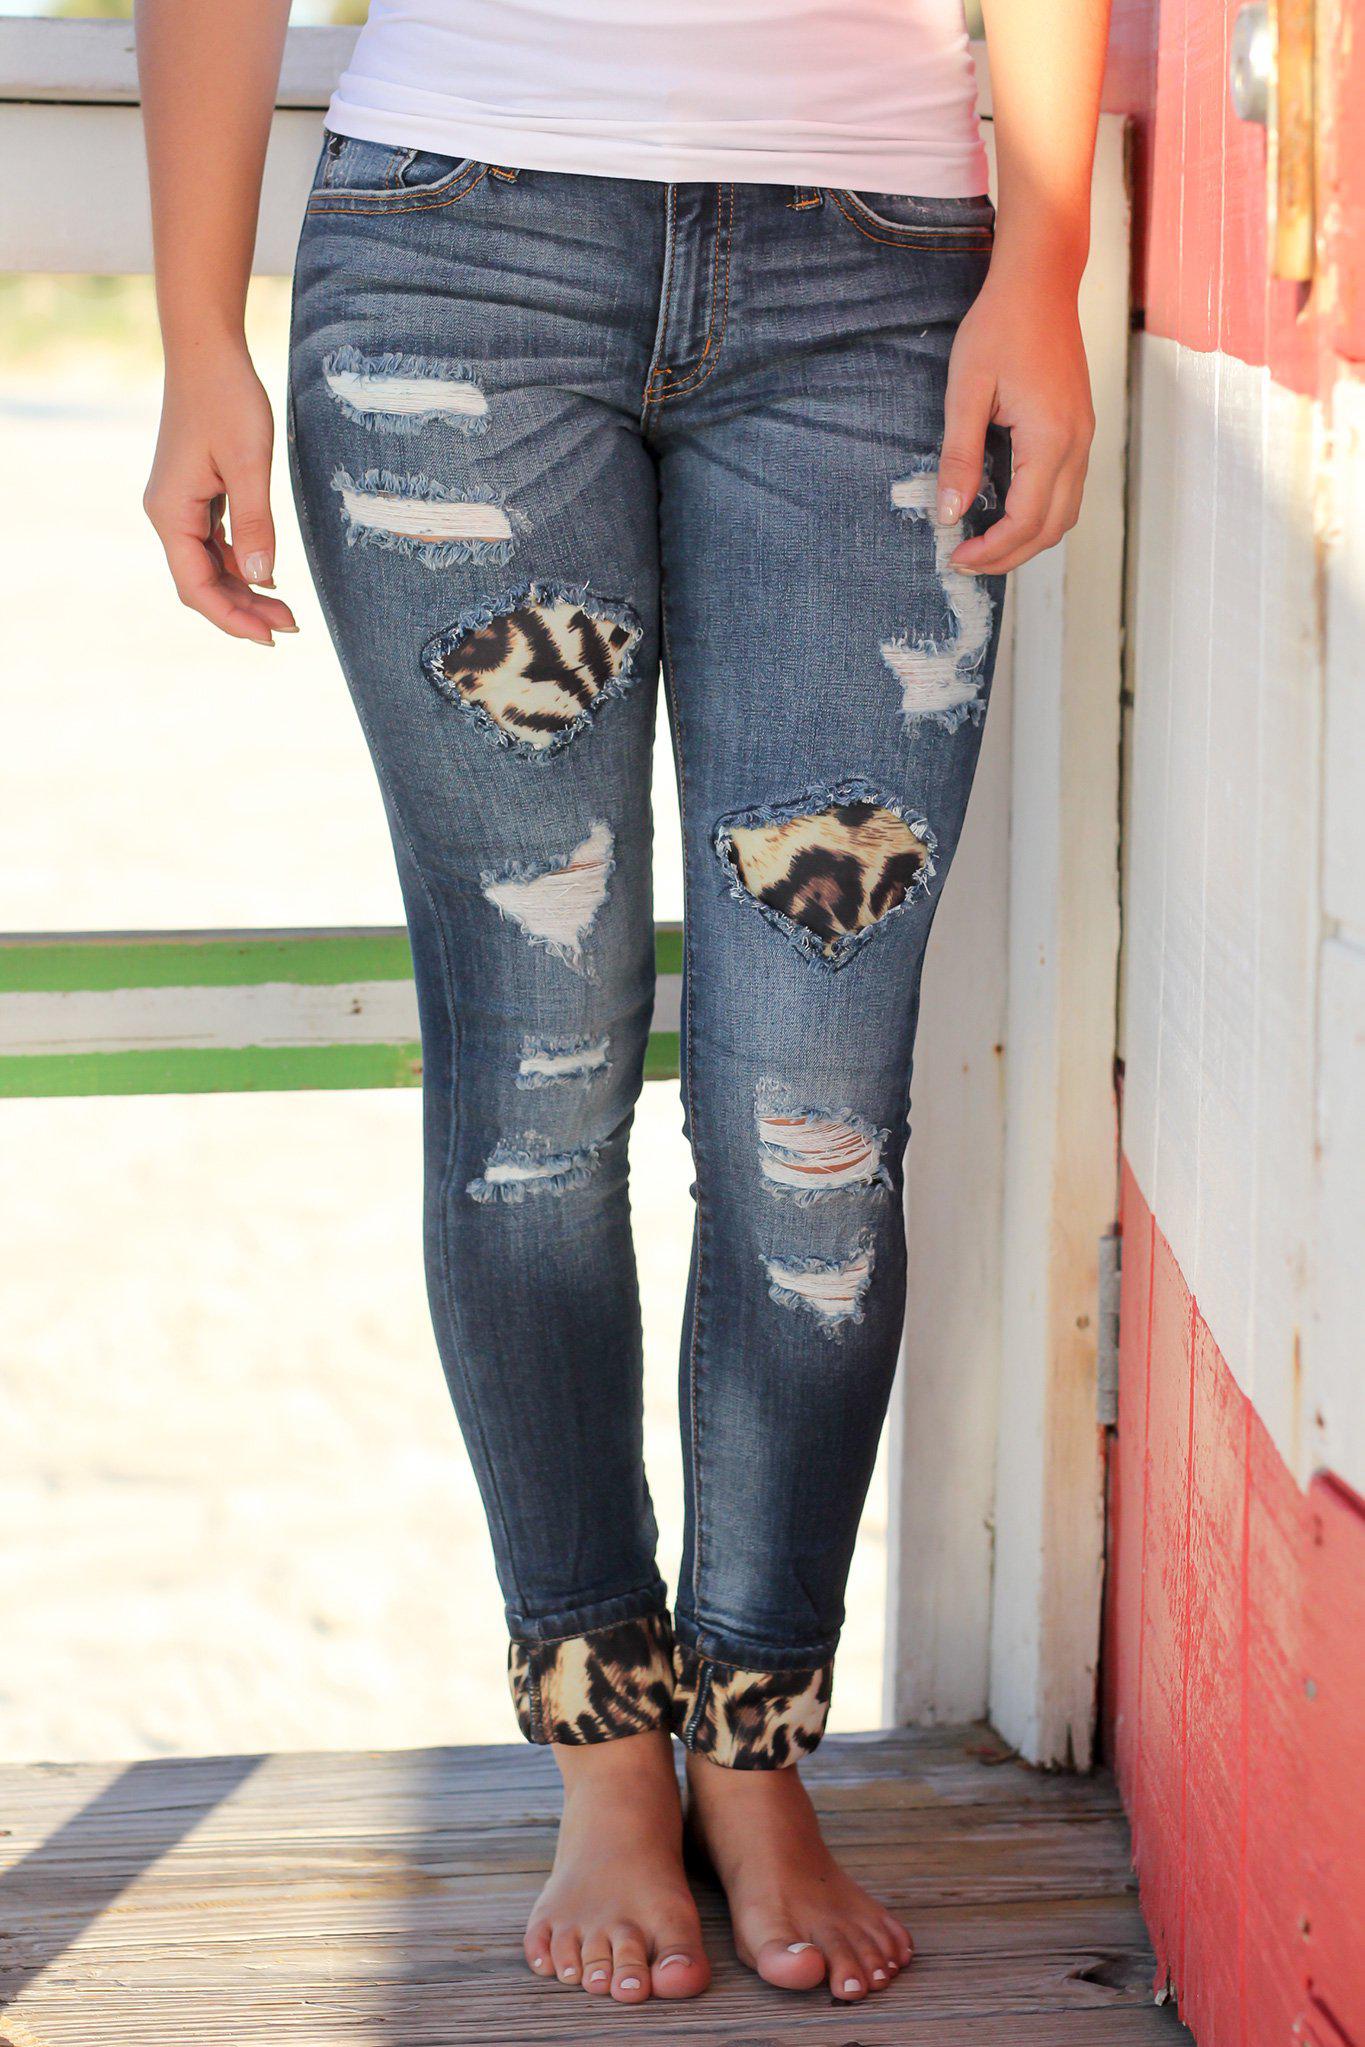 jeans with holes and patches